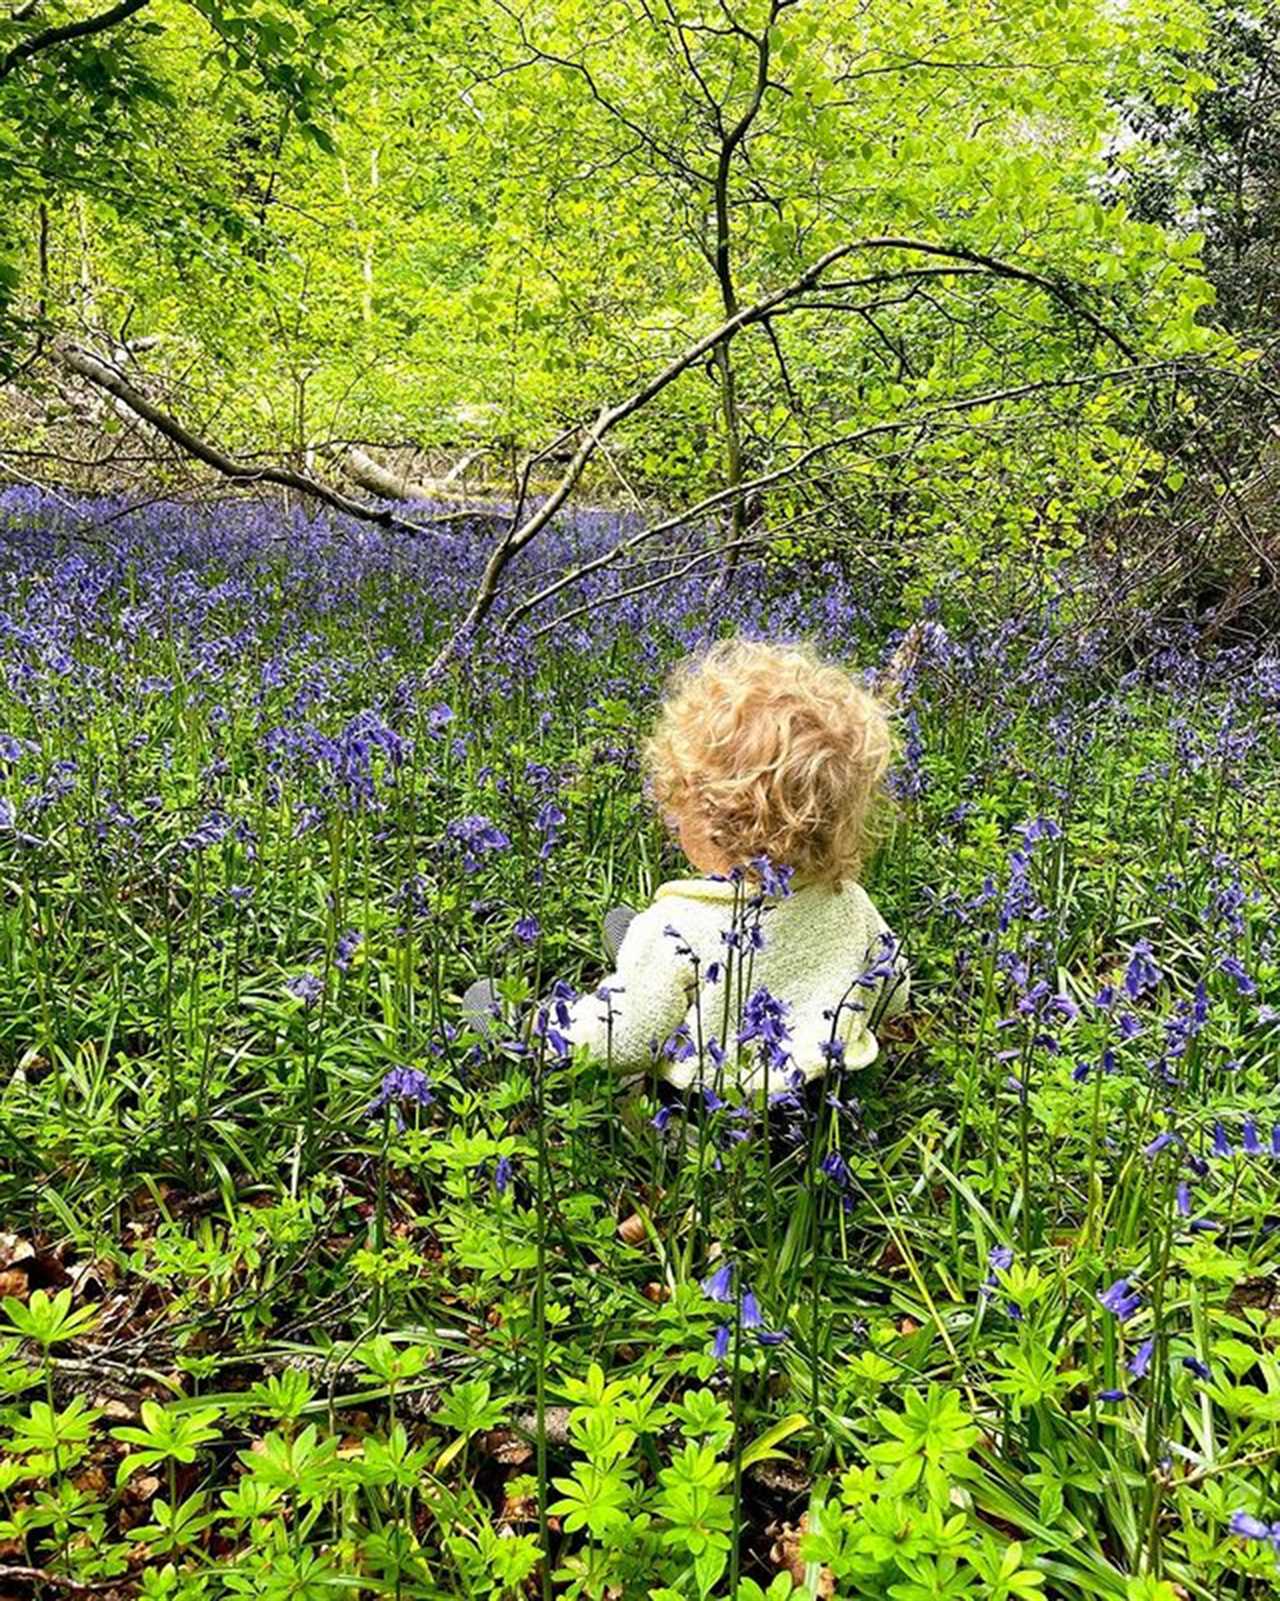 Carrie uploaded a picture of Wilfred, 1, among a patch of bluebells